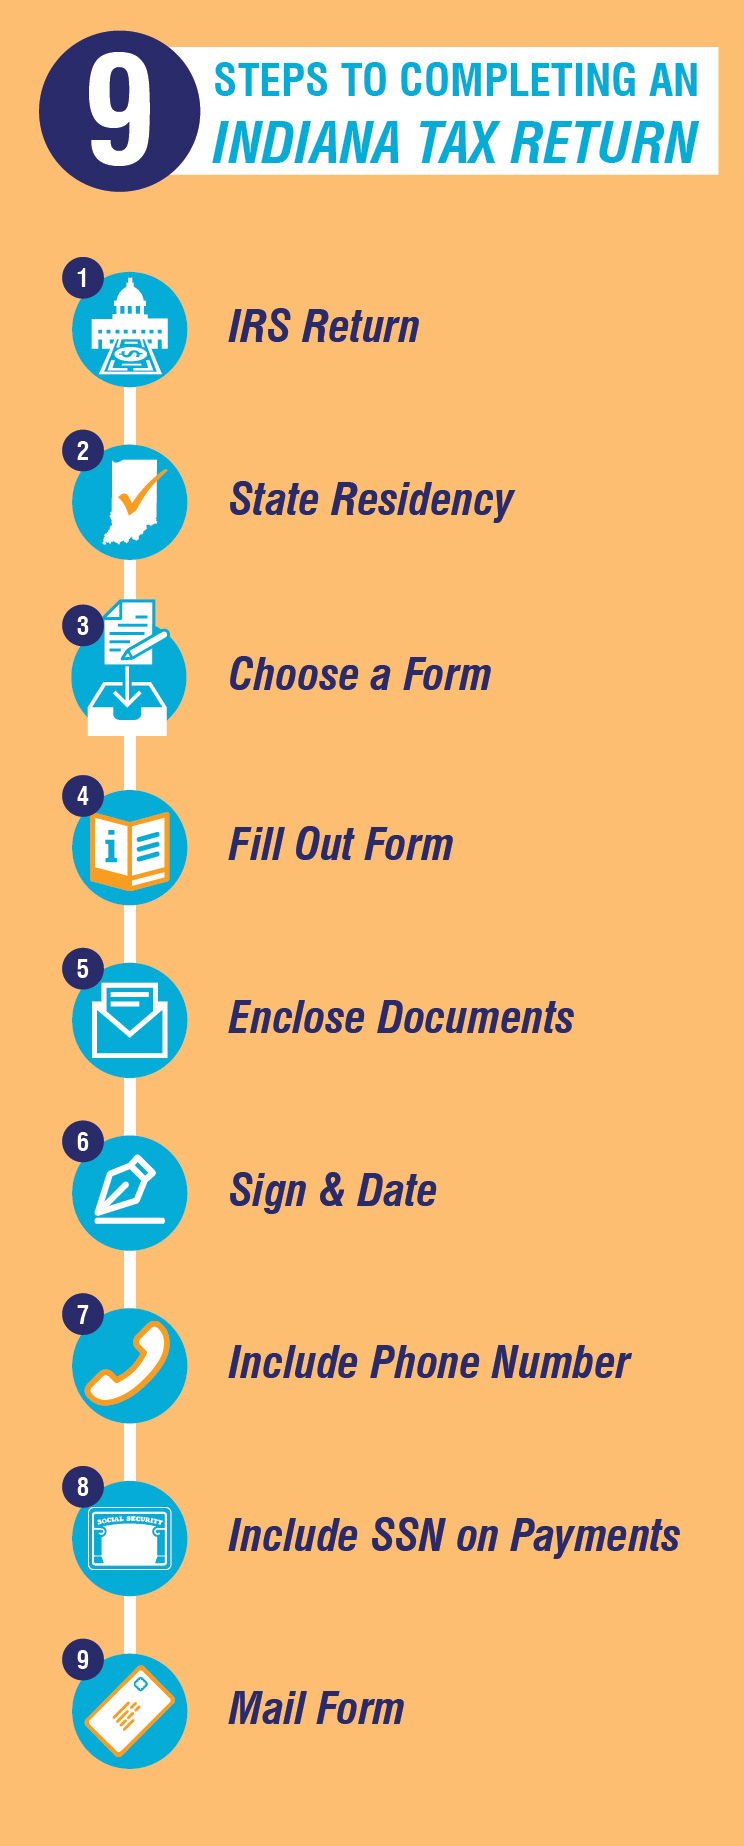 Nine steps to completing an Indiana Tax Return: 1. IRS Return, 2. State Residency, 3. Choose a Form, 4. Fill Out Form, 5. Enclose Documents, 6. Sign and Date, 7. Include Phone Number, 8. Include SSN on payments, 9. Mail form